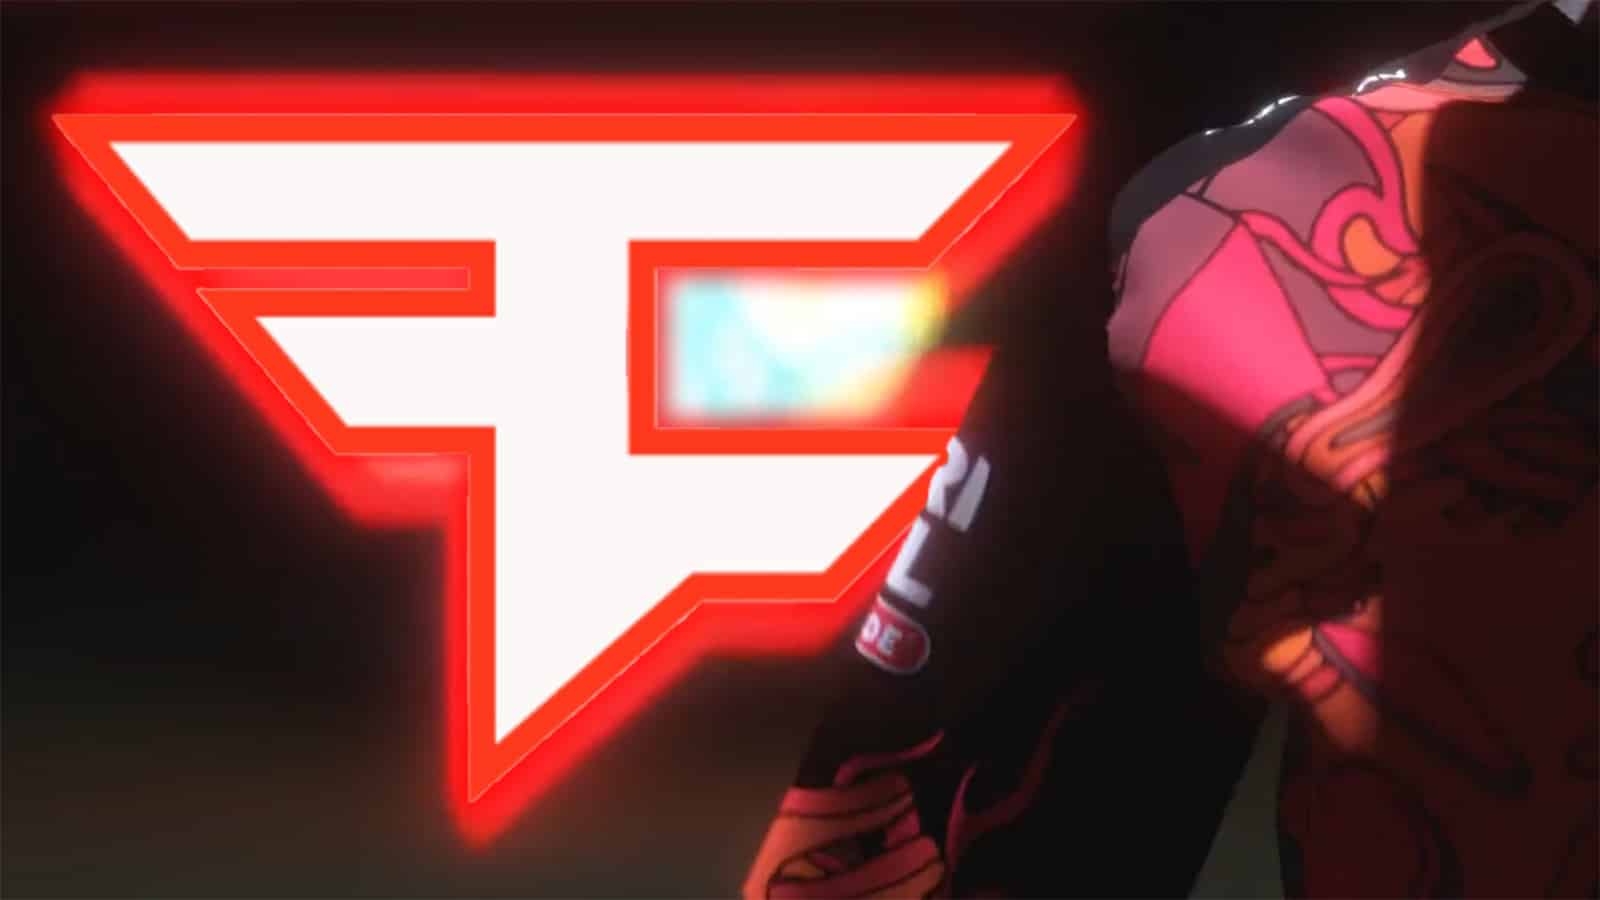 FaZe Clan reportedly lays off 40% of staff amid financial woes - Dexerto